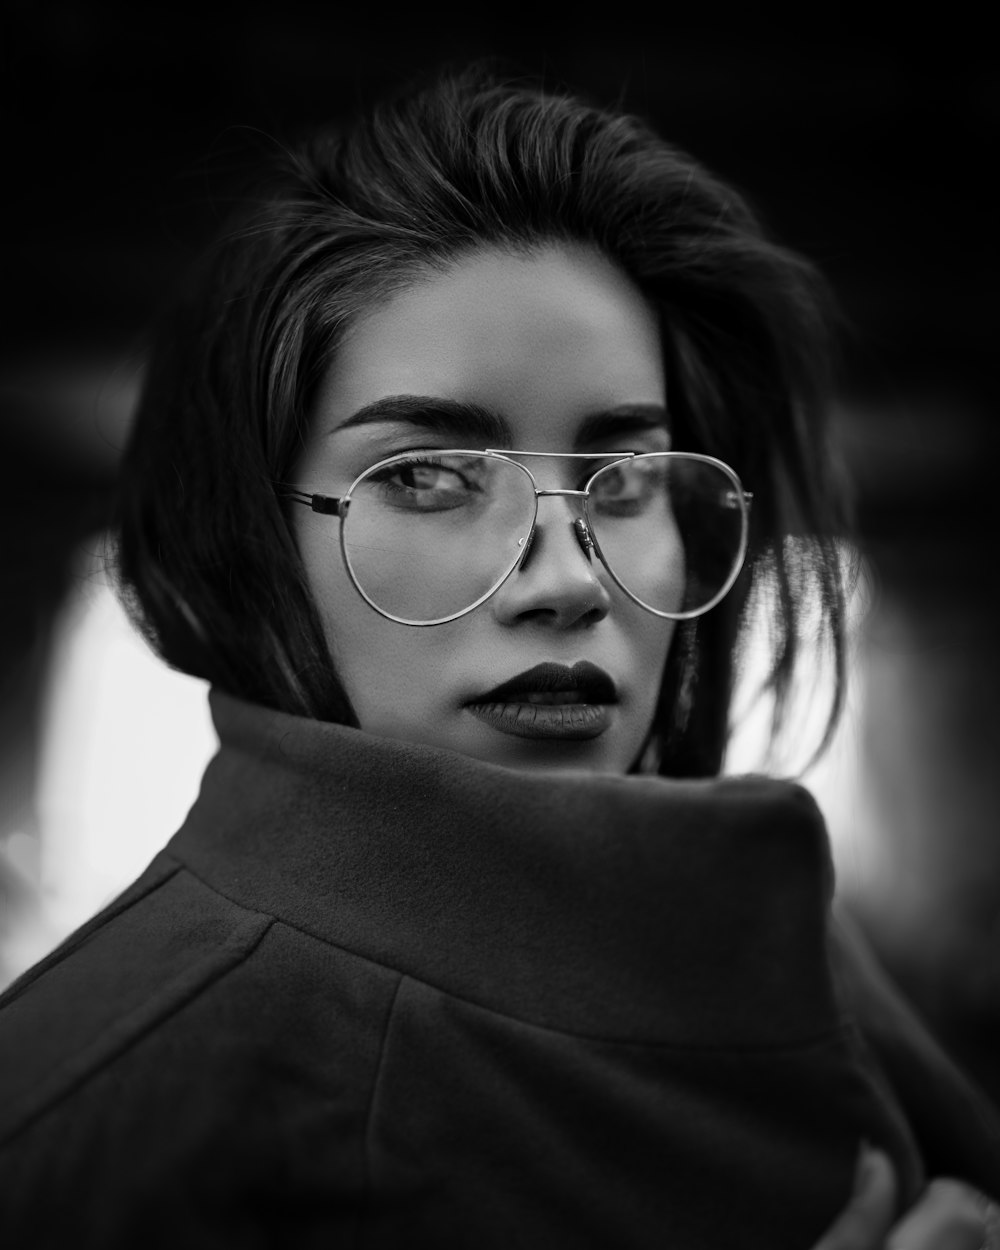 grayscale photo of woman wearing coat and eyeglasses